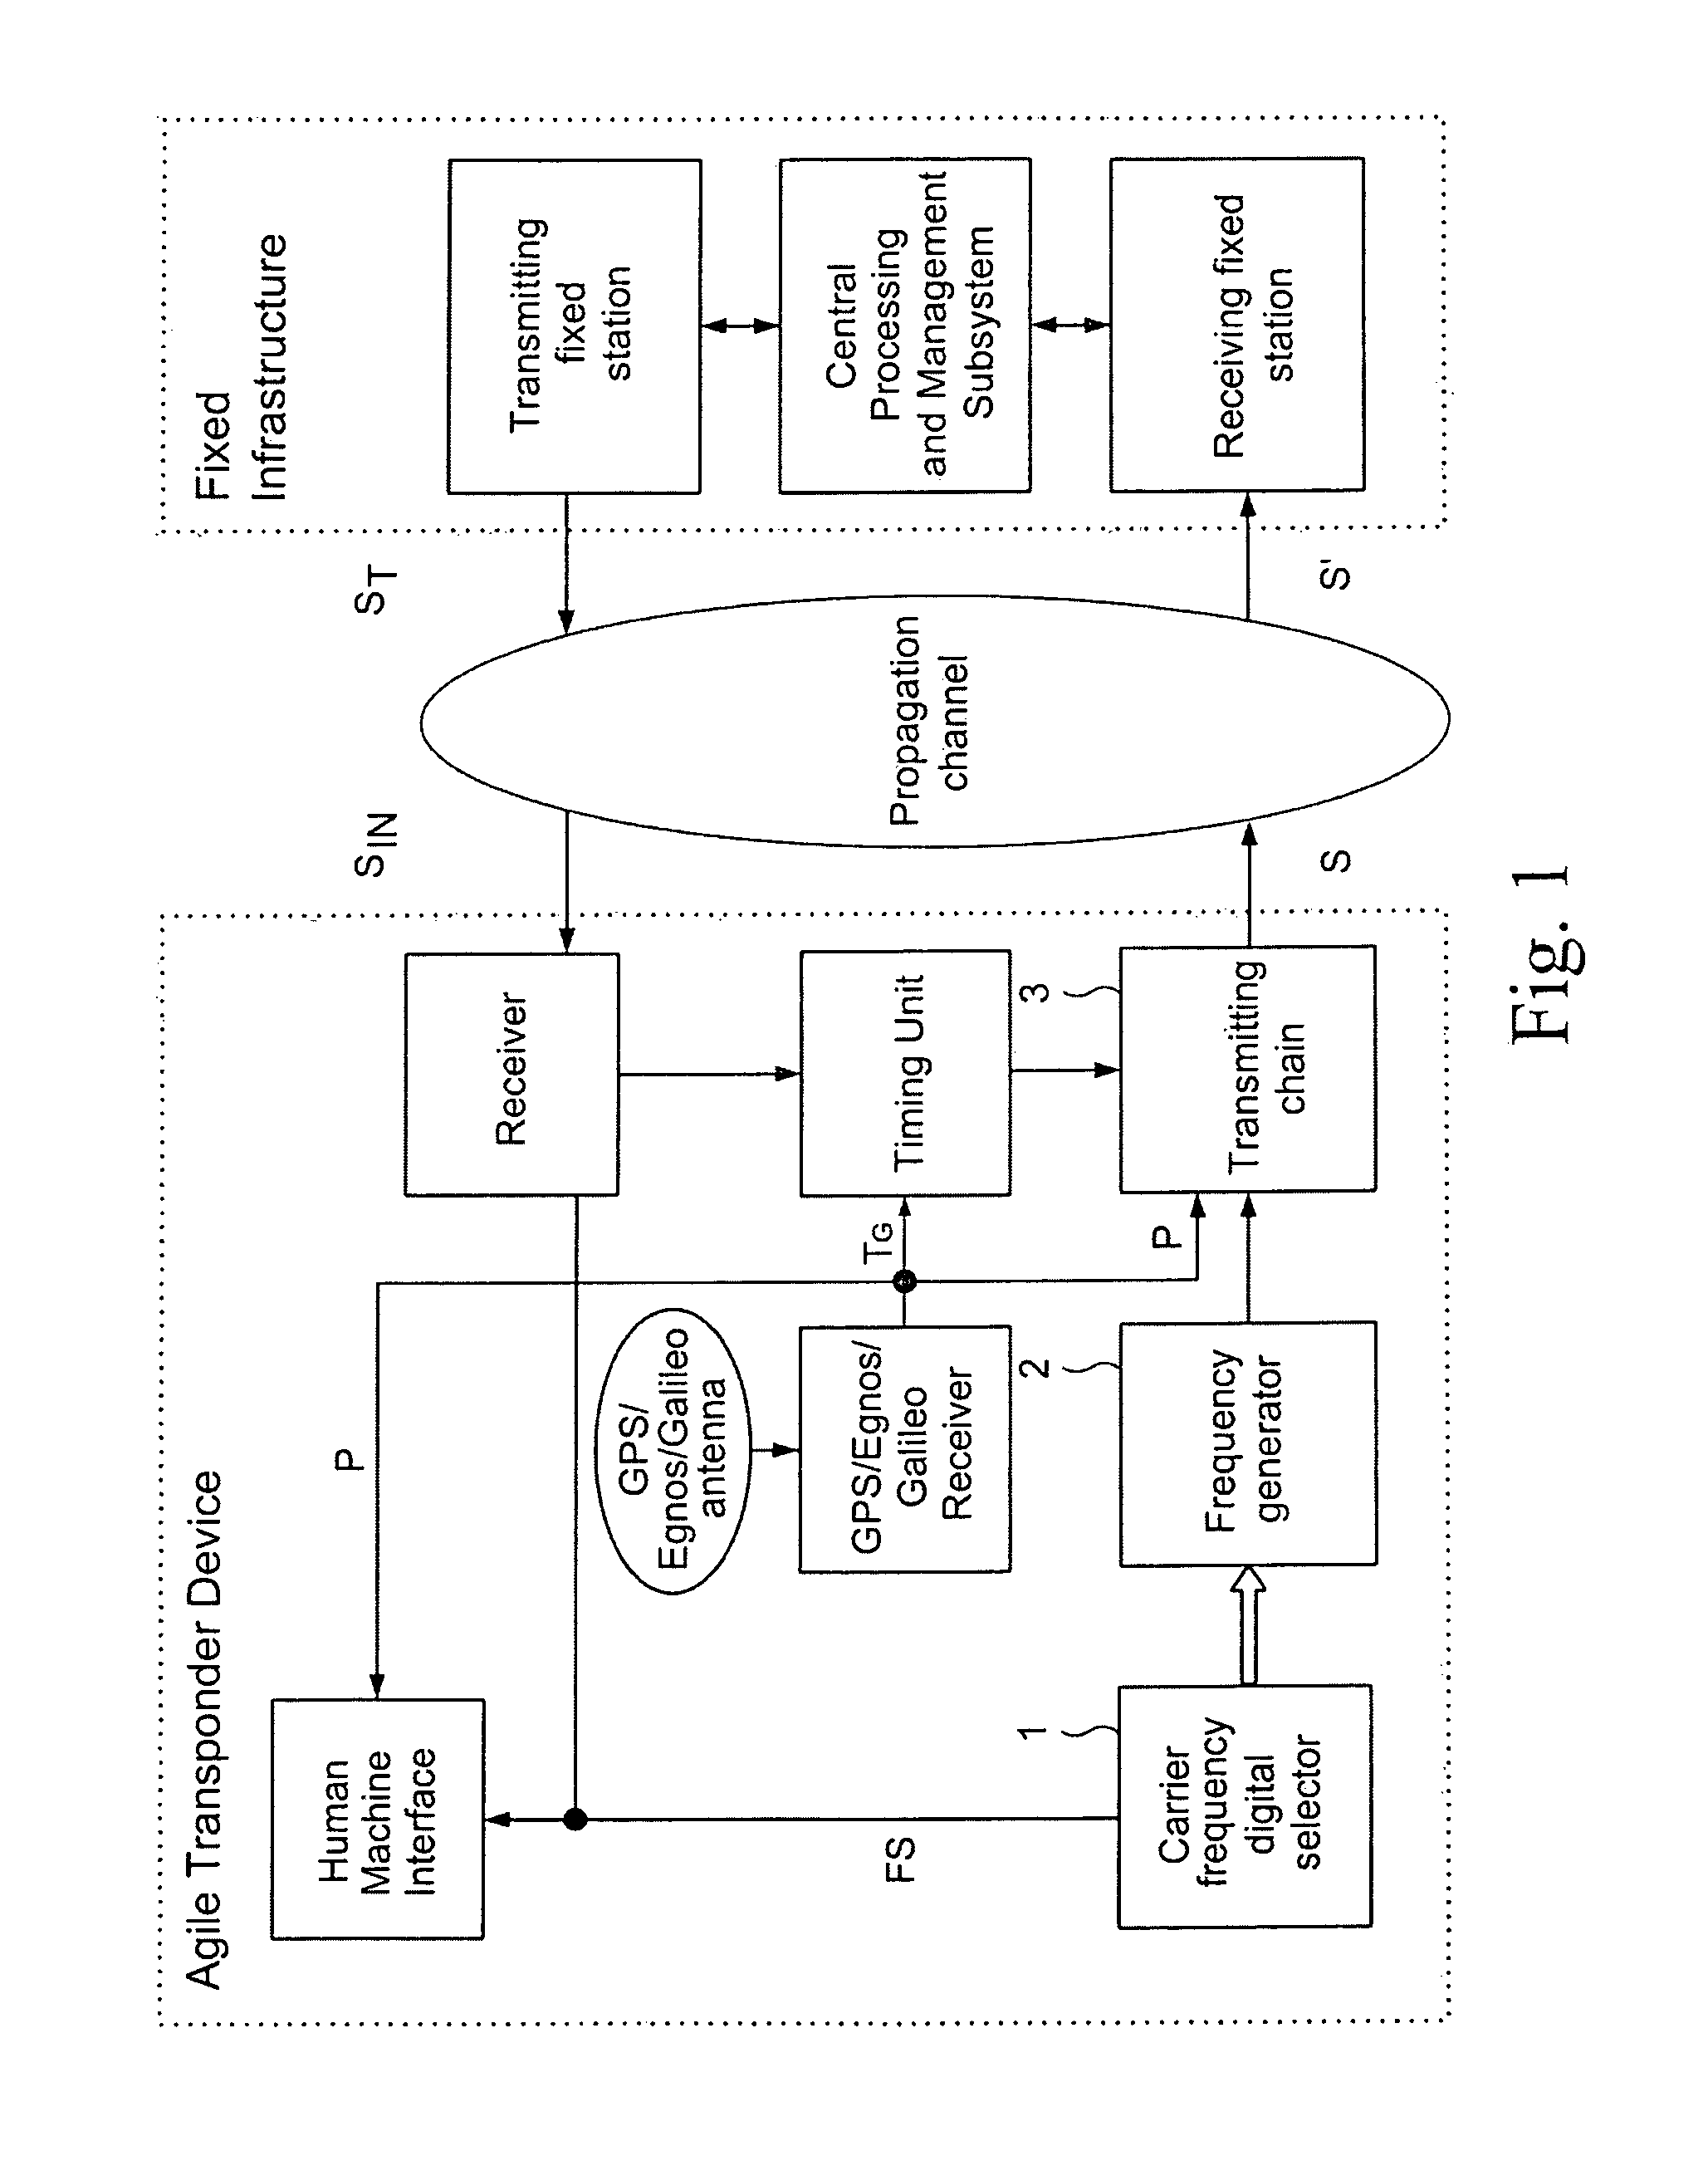 High-capacity location and identification system for cooperating mobiles with frequency agile and time division transponder device on board